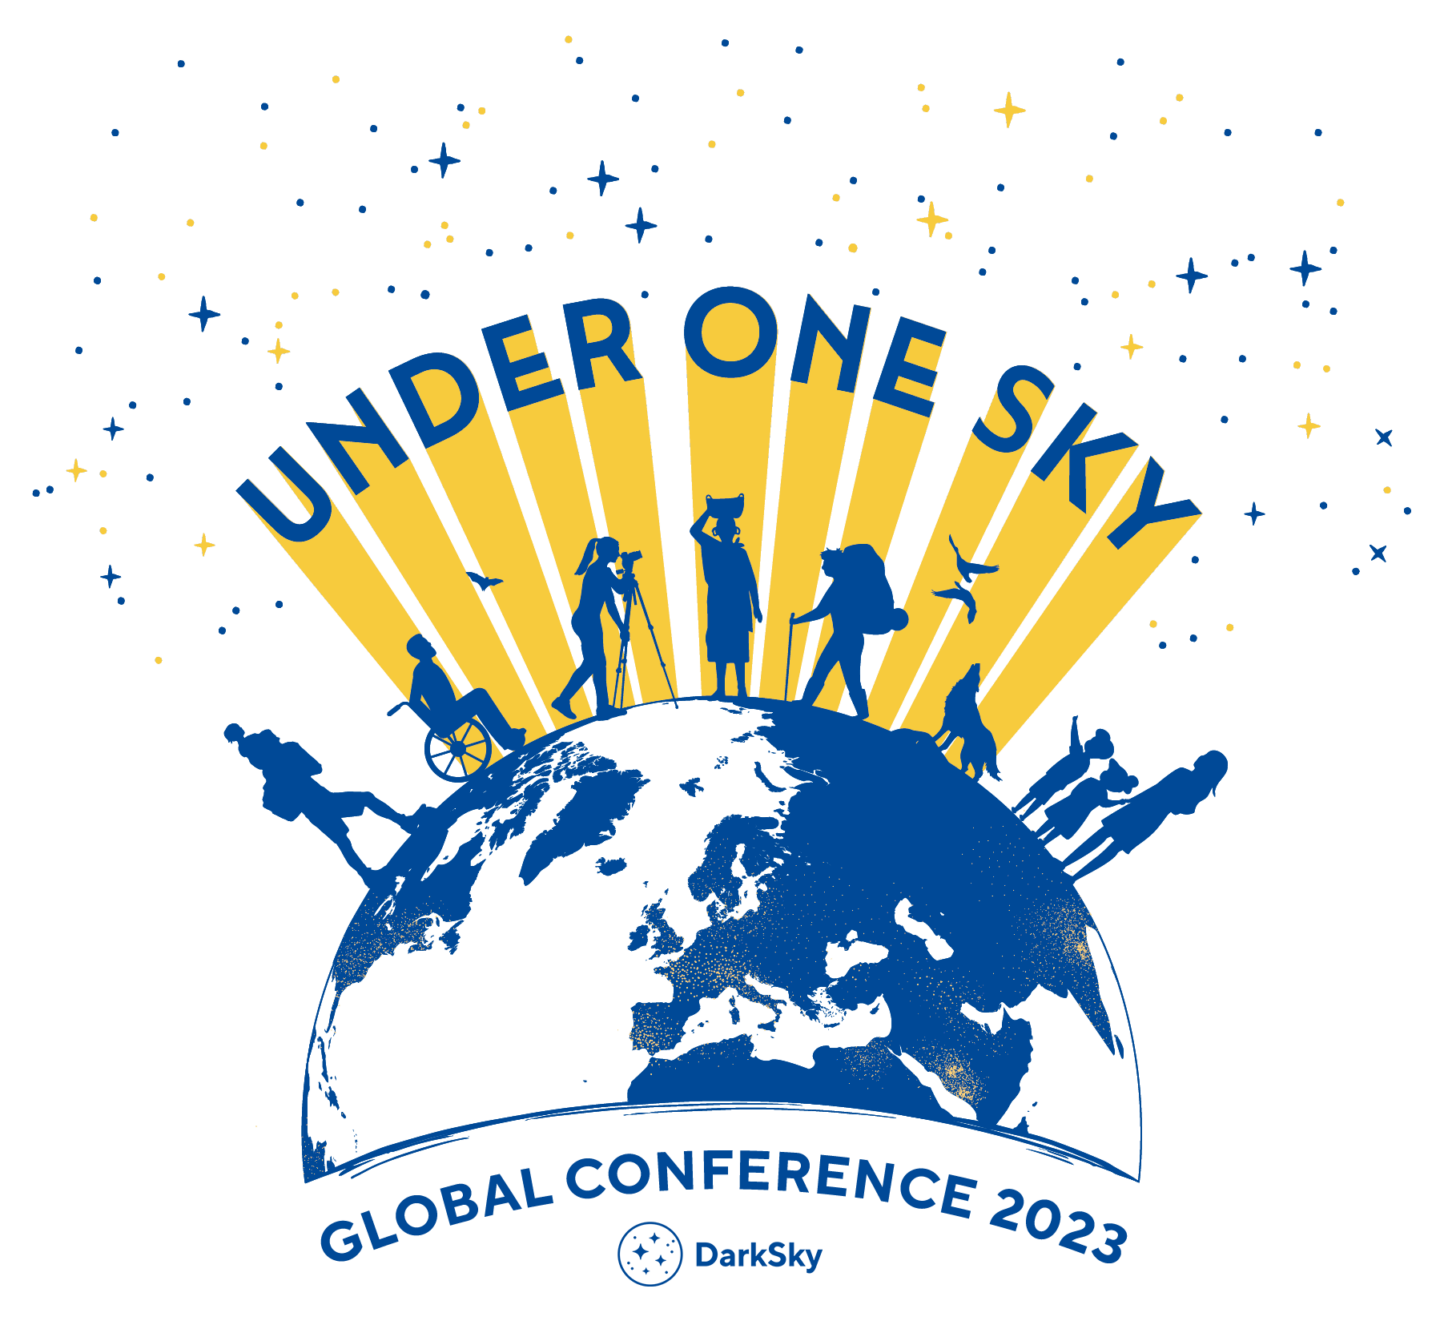 Under One Sky logo with silhouettes of people around the globe